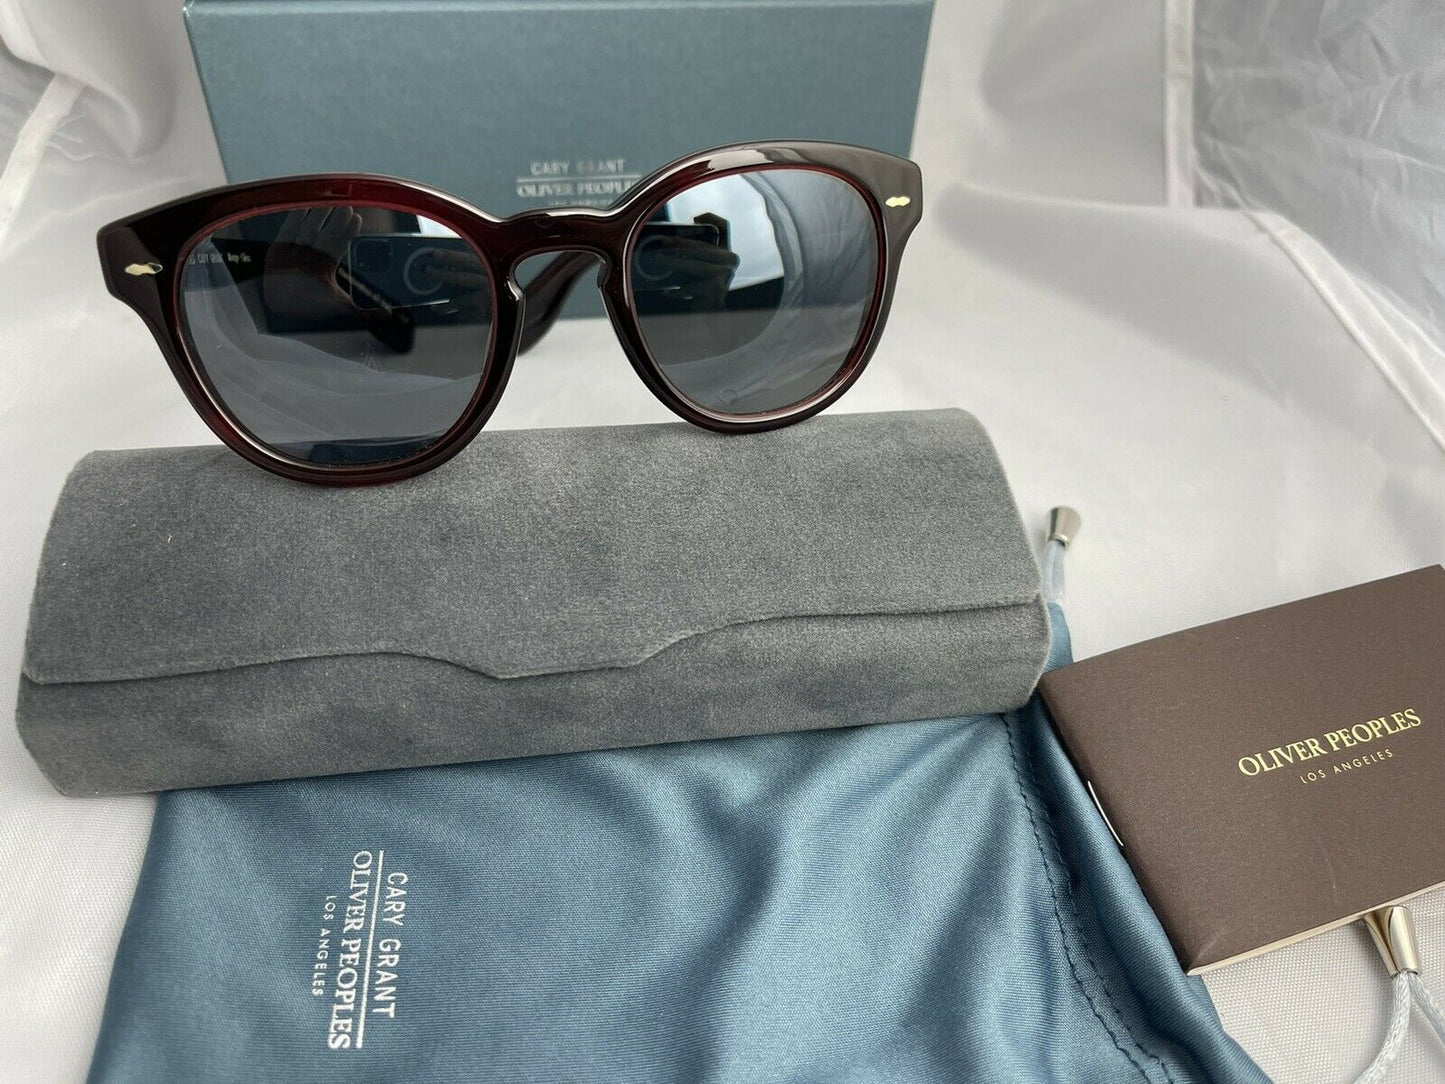 Oliver Peoples Cary Grant OV5413SU Bordeaux Bark / Carbon Gray size 48 New